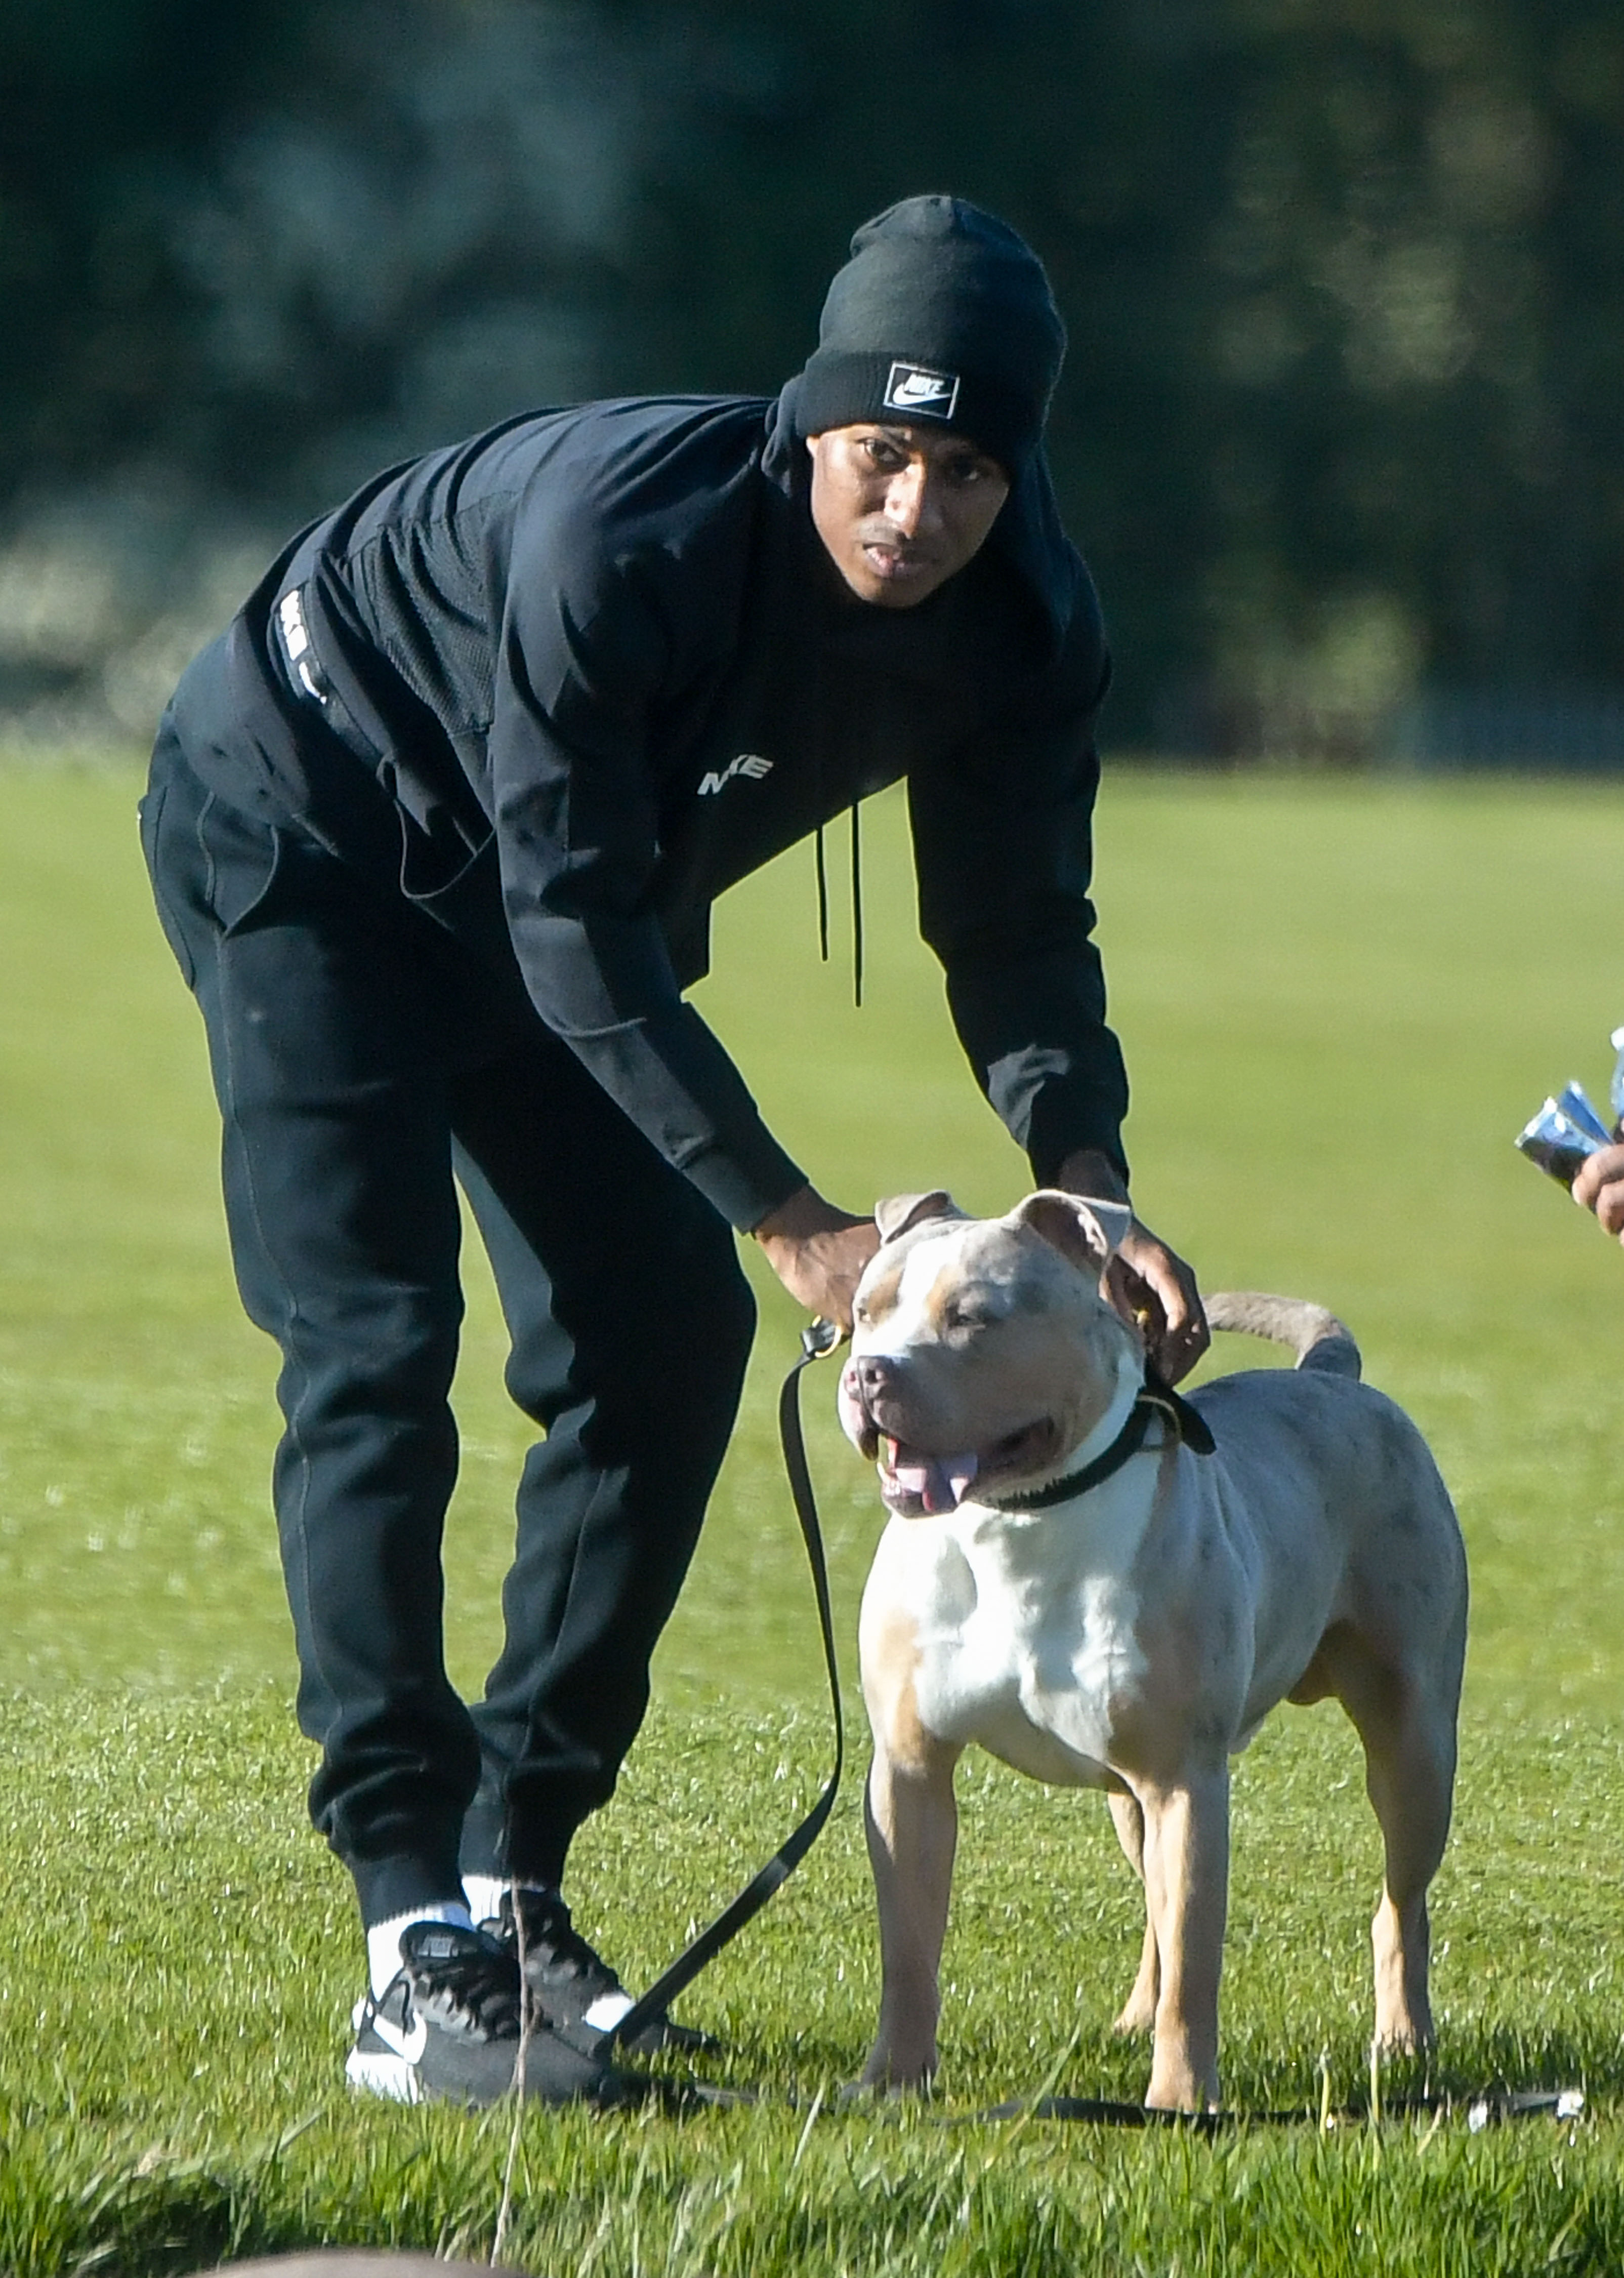 The Man United striker, 23, took Cane Corso Saint and another of his pooches for a kickabout